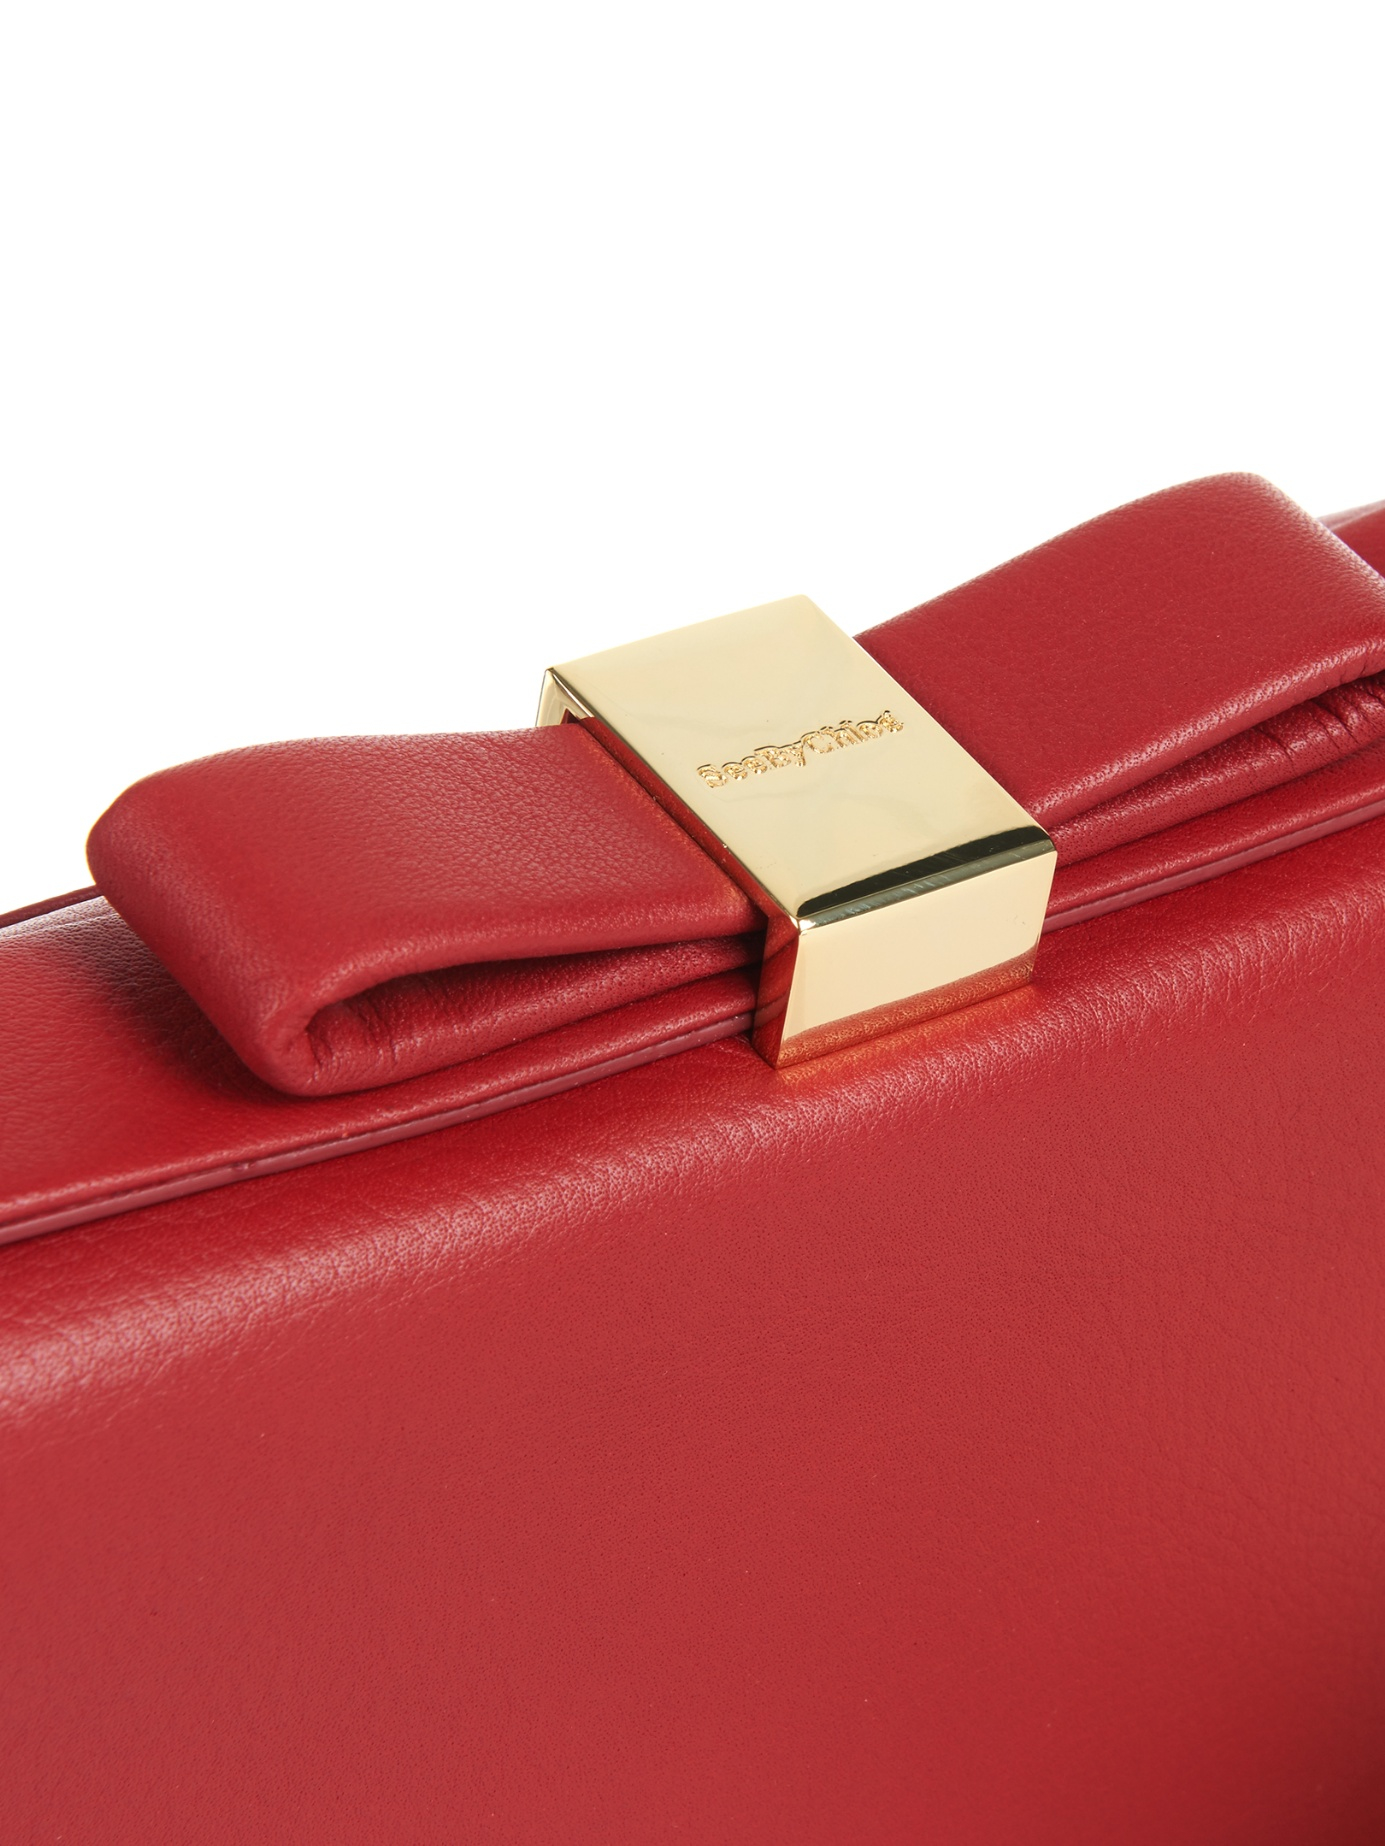 See by chlo Nora Leather Clutch Bag in Red | Lyst